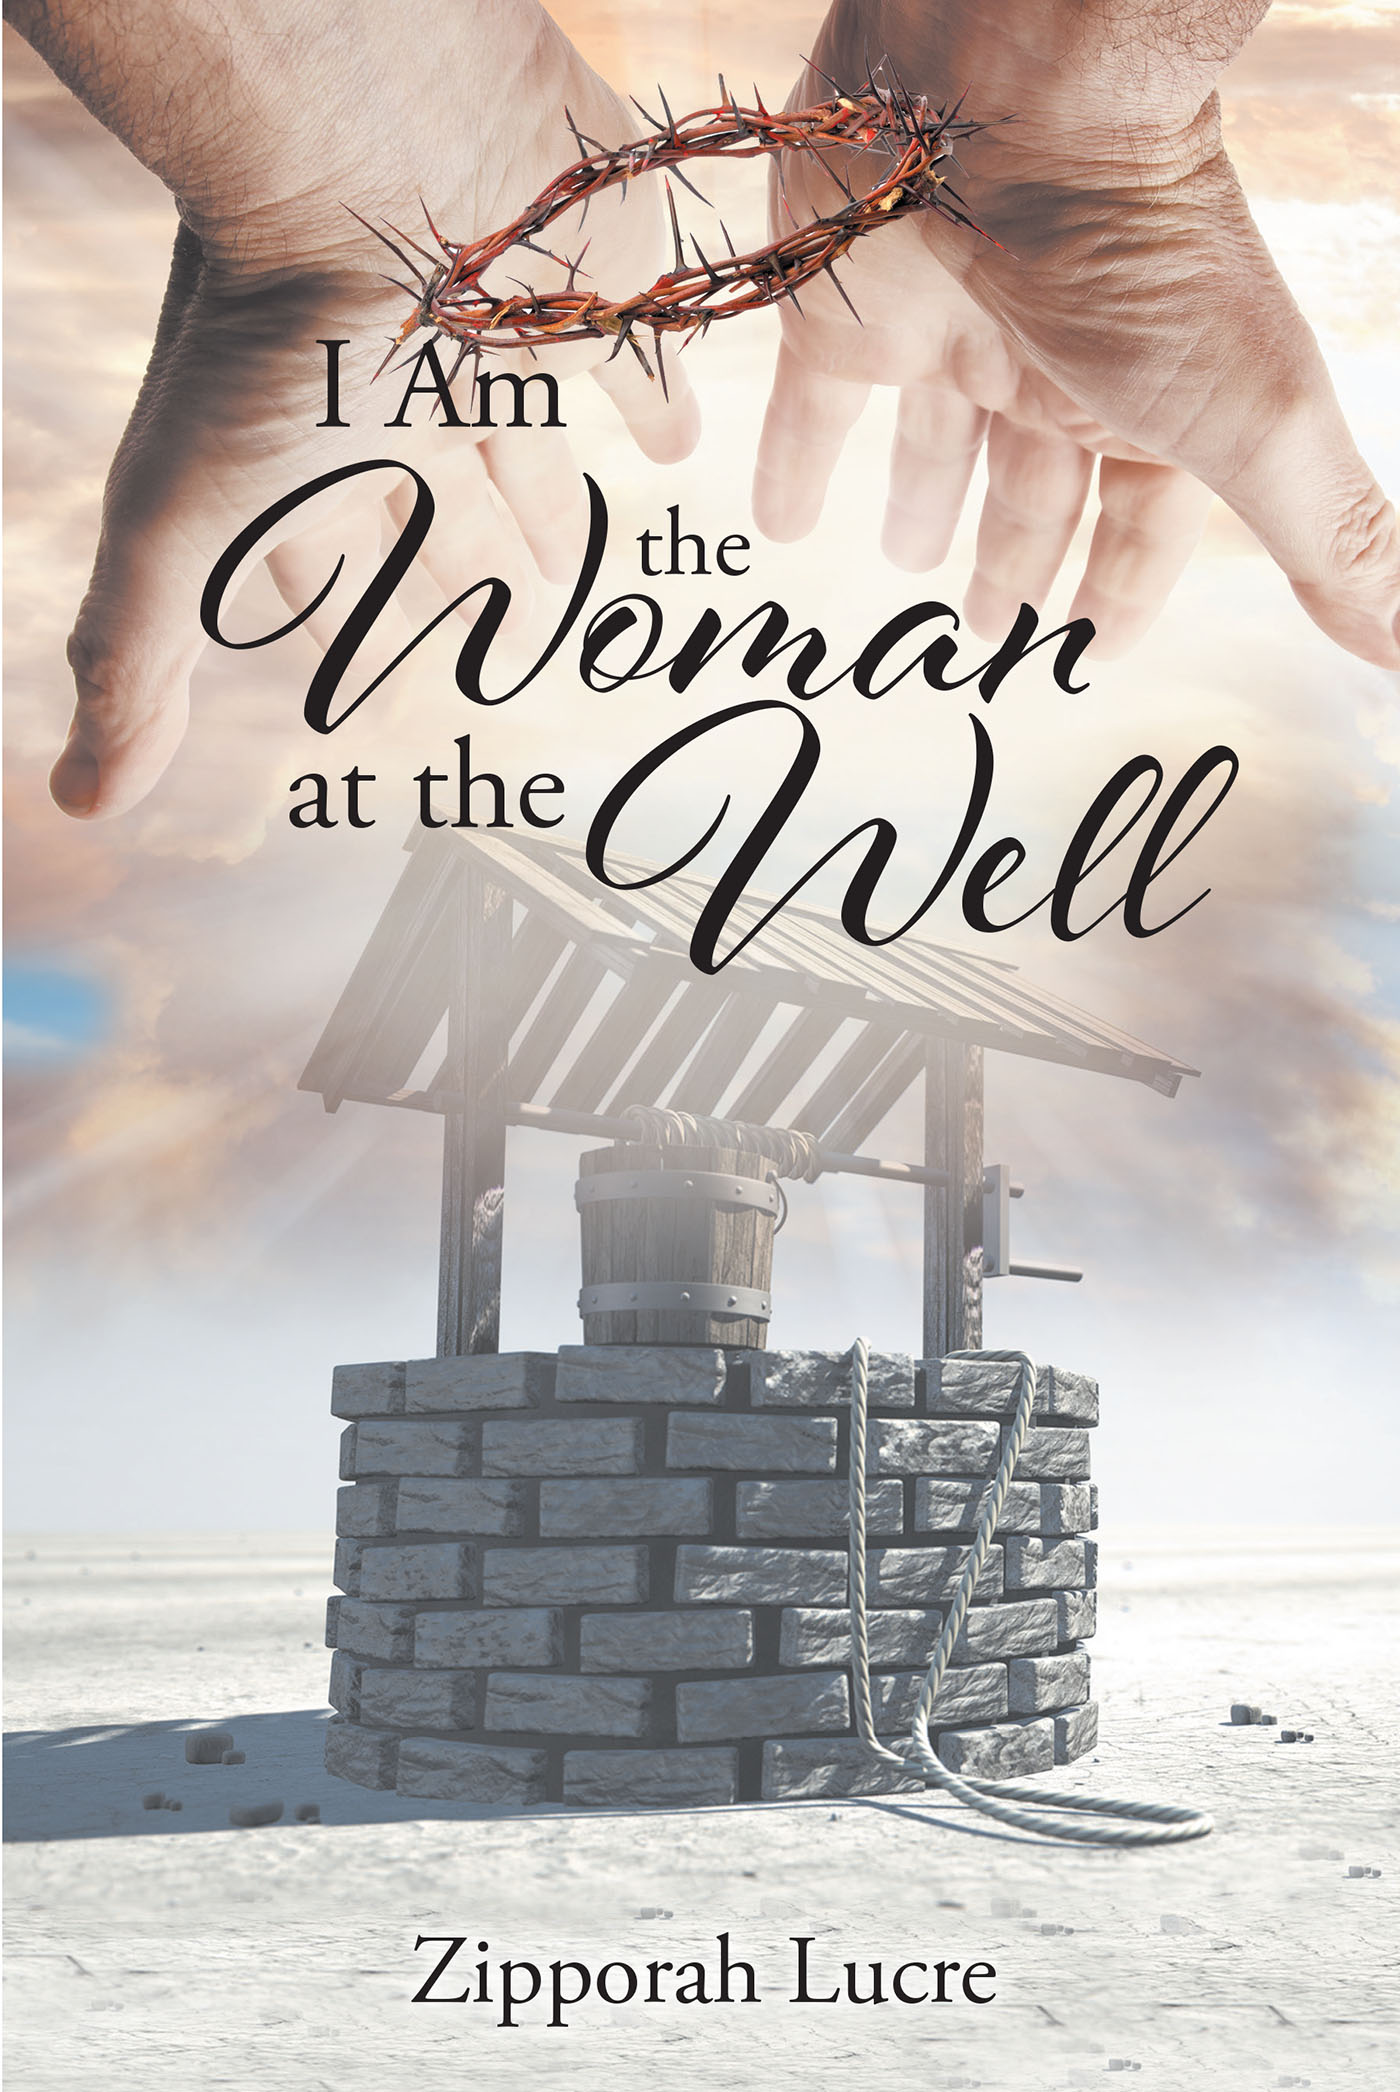 Zipporah Lucre’s Newly Released "I Am the Woman at the Well" is a Thoughtful Reflection on the Strong Faith of a Woman in the Throes of Spiritual Growth